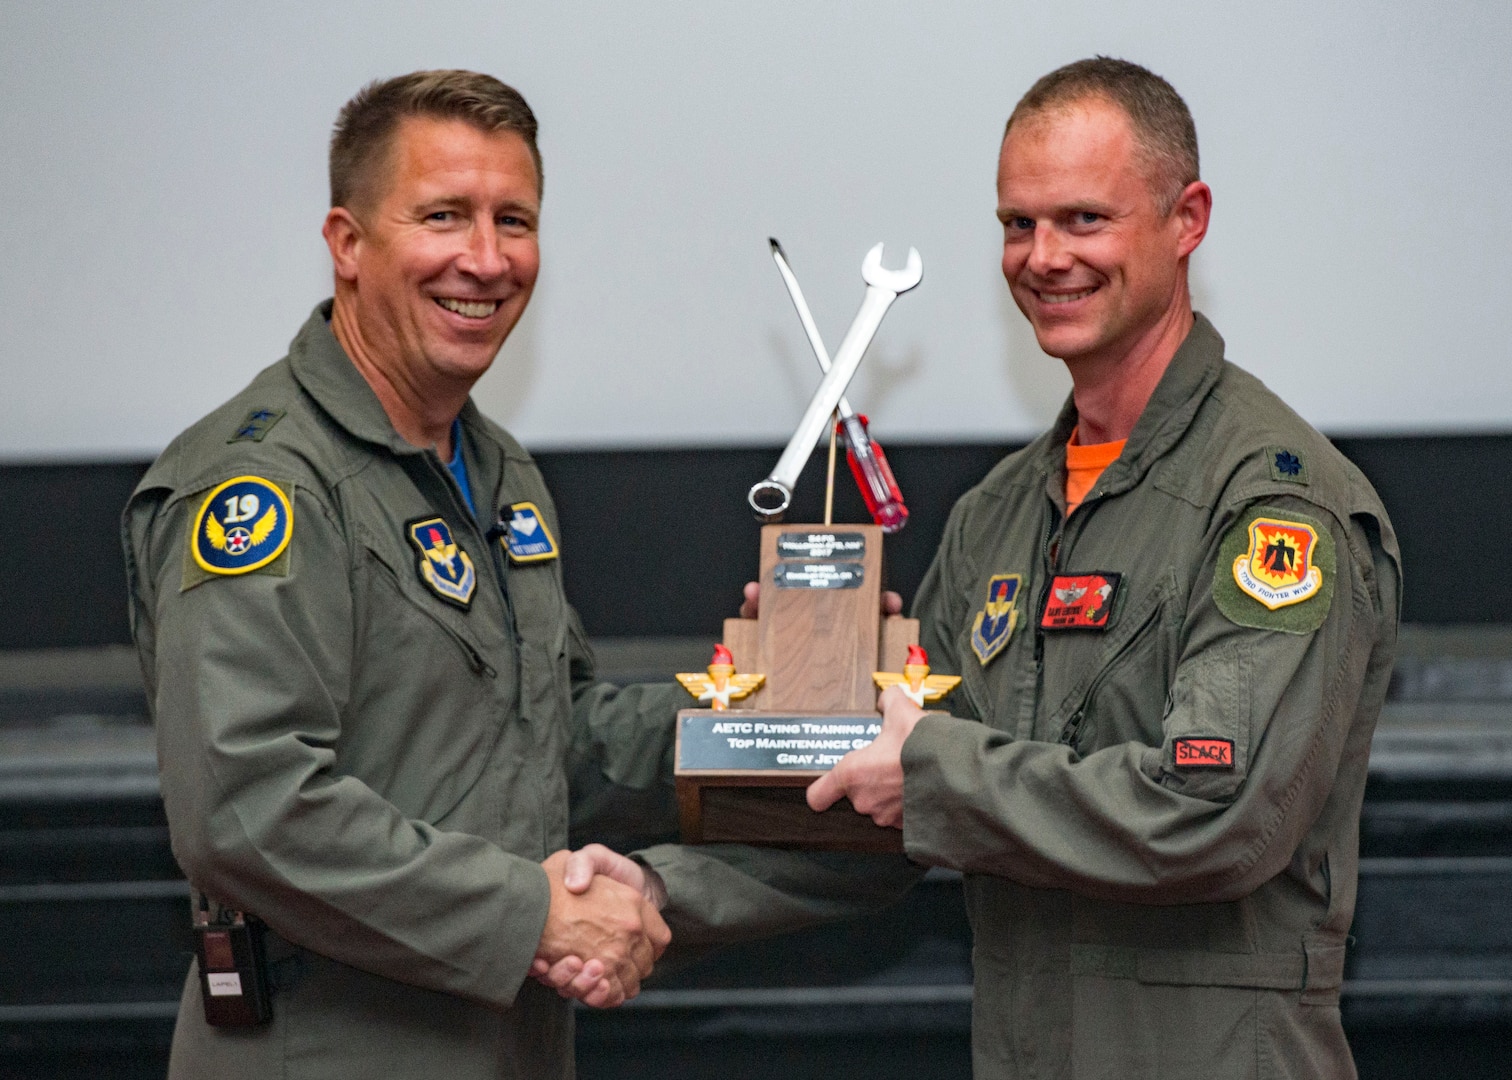 Maj. Gen. Patrick Doherty, 19th Air Force commander, presents the Top Maintenance Organization-Gray Jet Division Award to Lt. Col. Michael Lambert, 173rd Maintenance Group commander, during the Air Education and Training Command Flying Training Awards Ceremony Oct. 26, 2018, at Joint Base San Antonio-Randolph, Texas. The award ceremony recognizes individuals, squadrons, groups and wings whose efforts have led to the highest levels of student production.